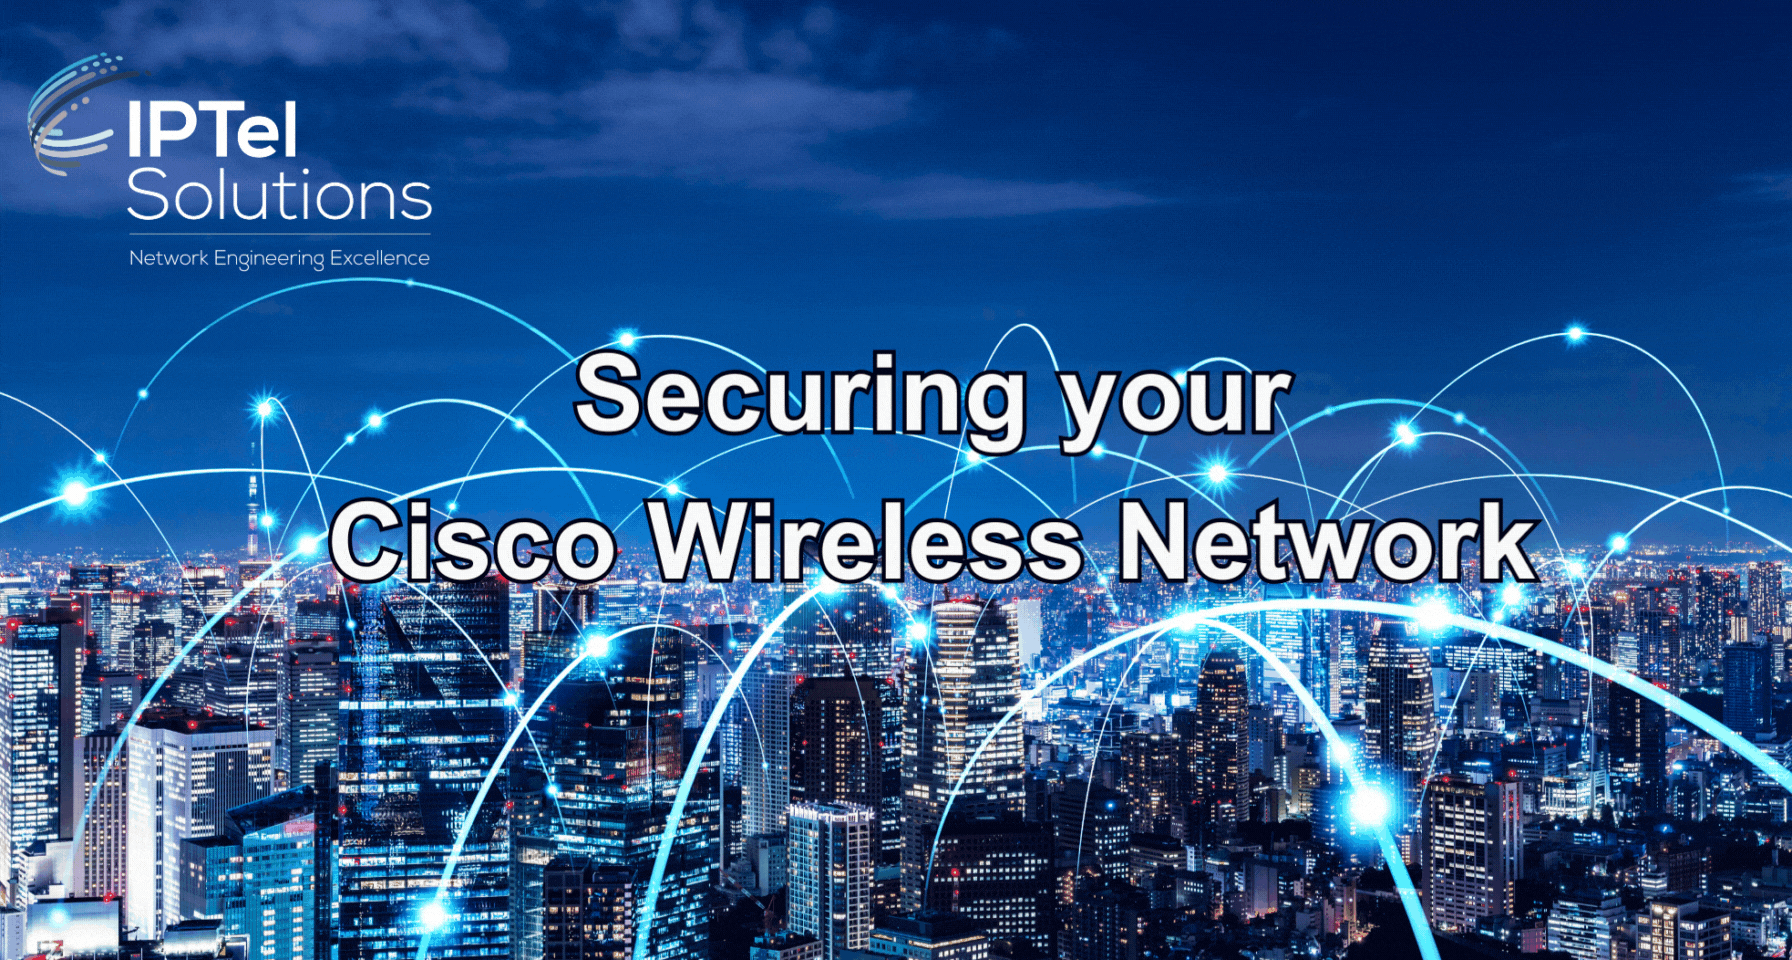 Securing your Cisco Wireless Network